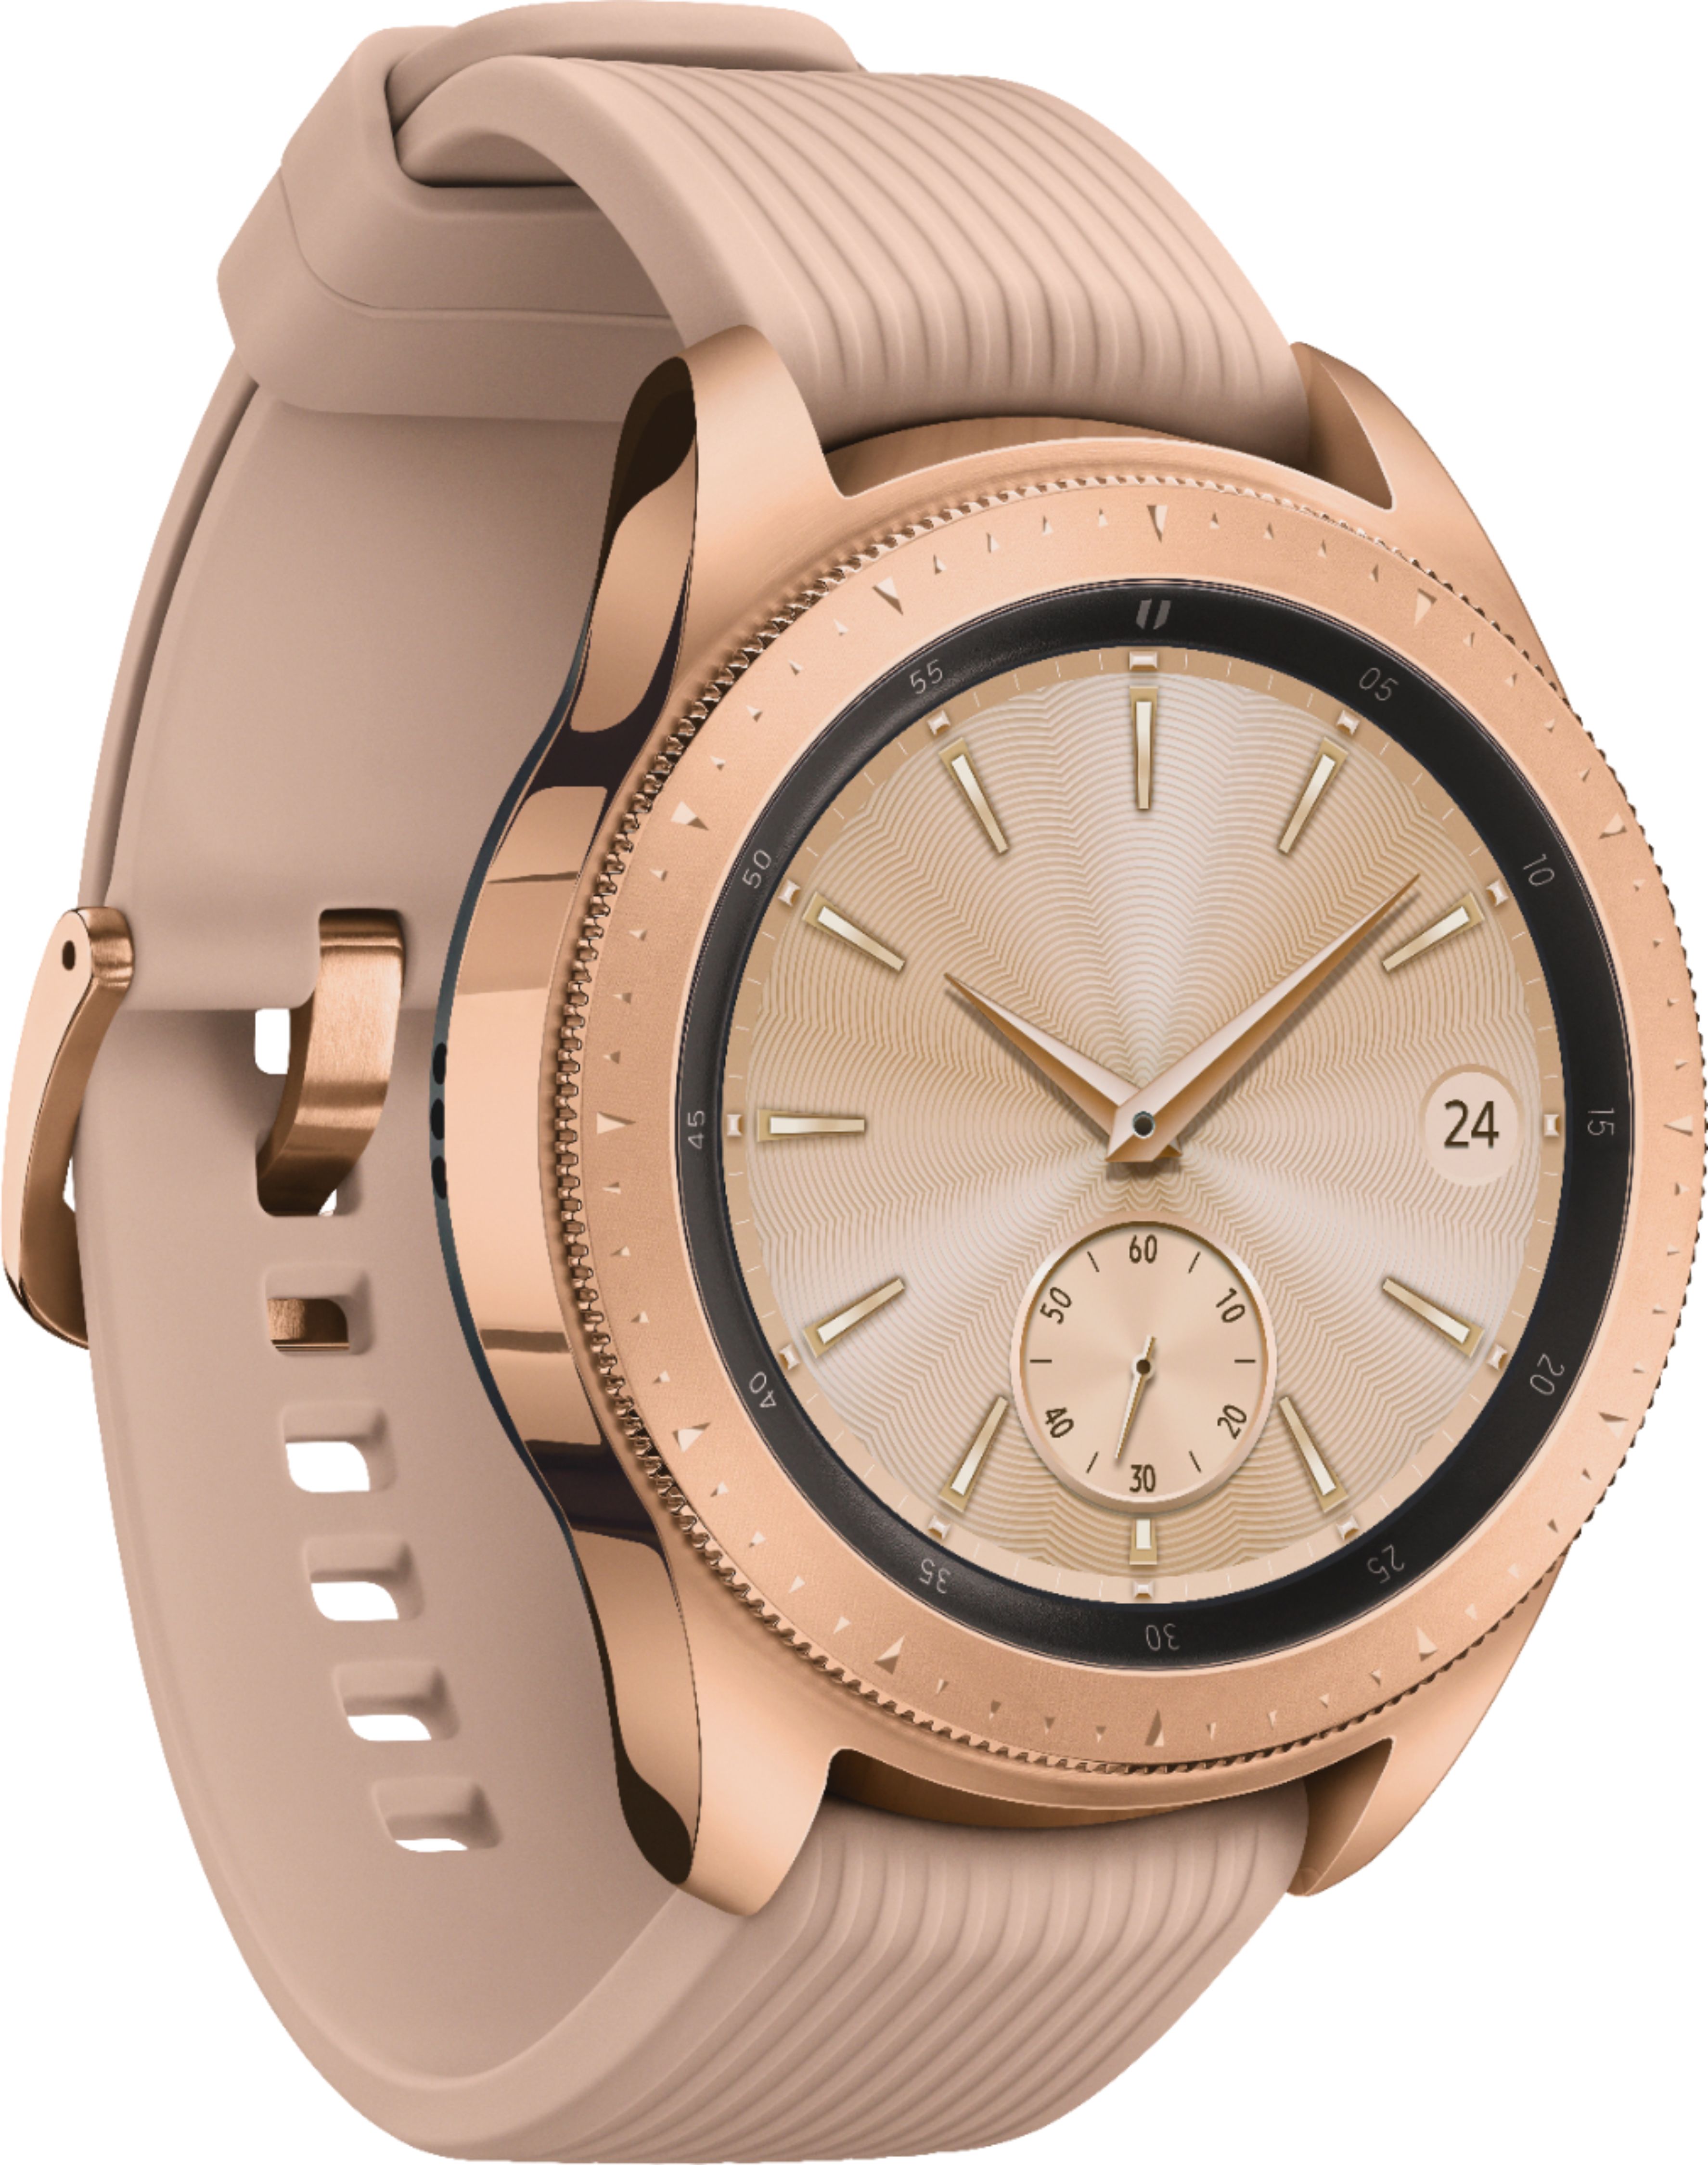 Angle View: Samsung - Geek Squad Certified Refurbished Galaxy Watch Smartwatch 42mm Stainless Steel - Rose Gold